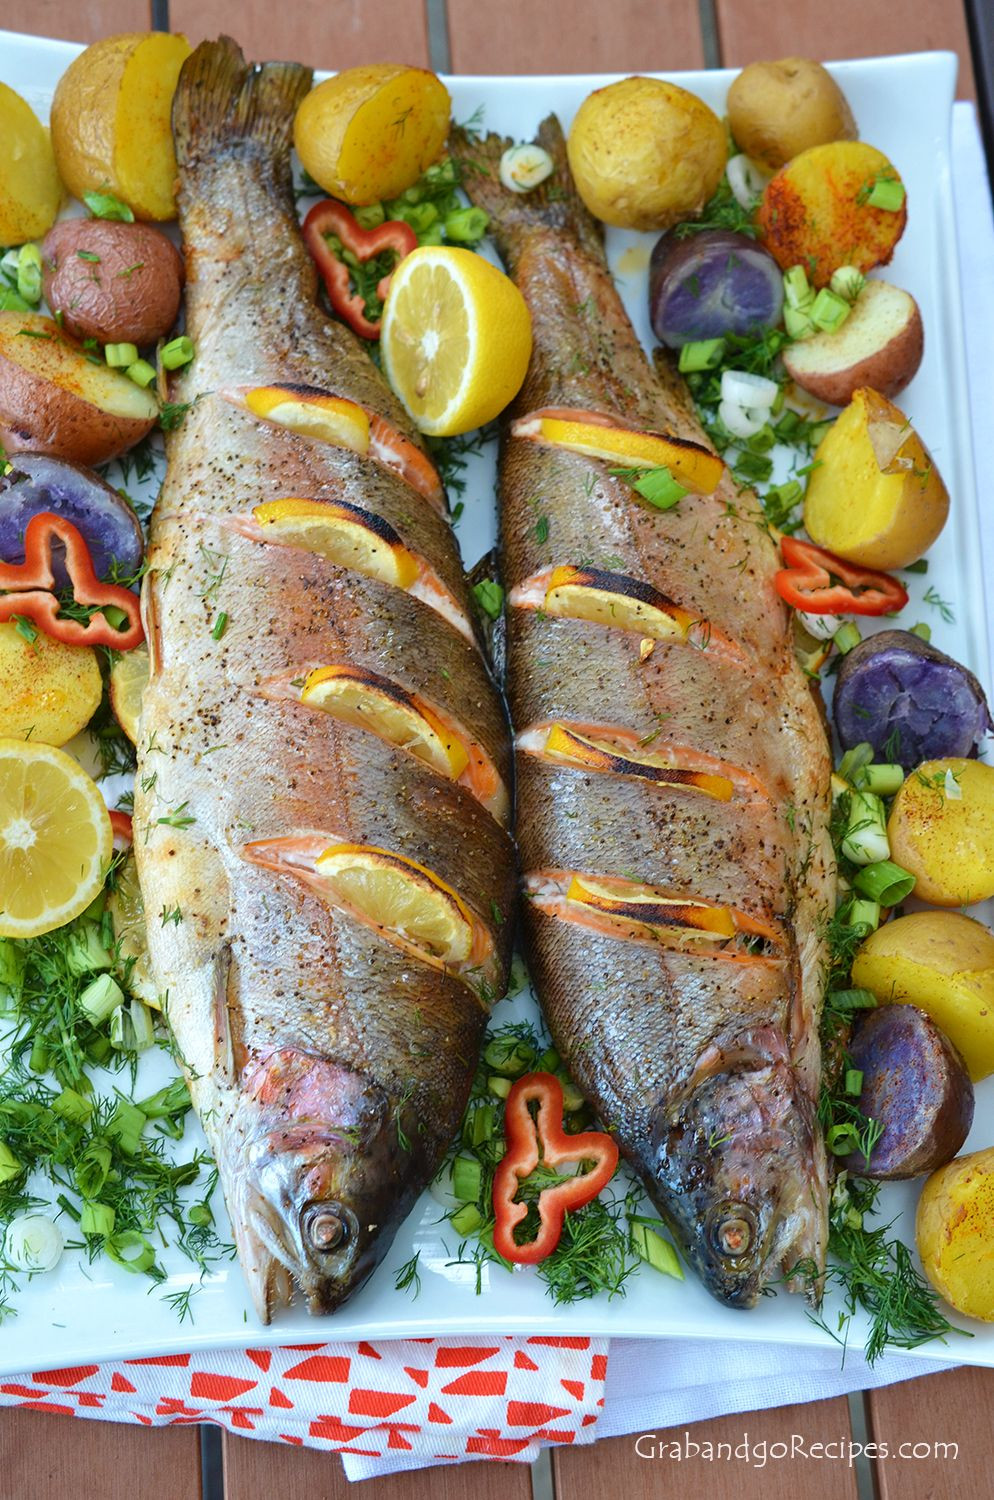 Stuffed Whole Fish Recipes
 Whole Baked Trout